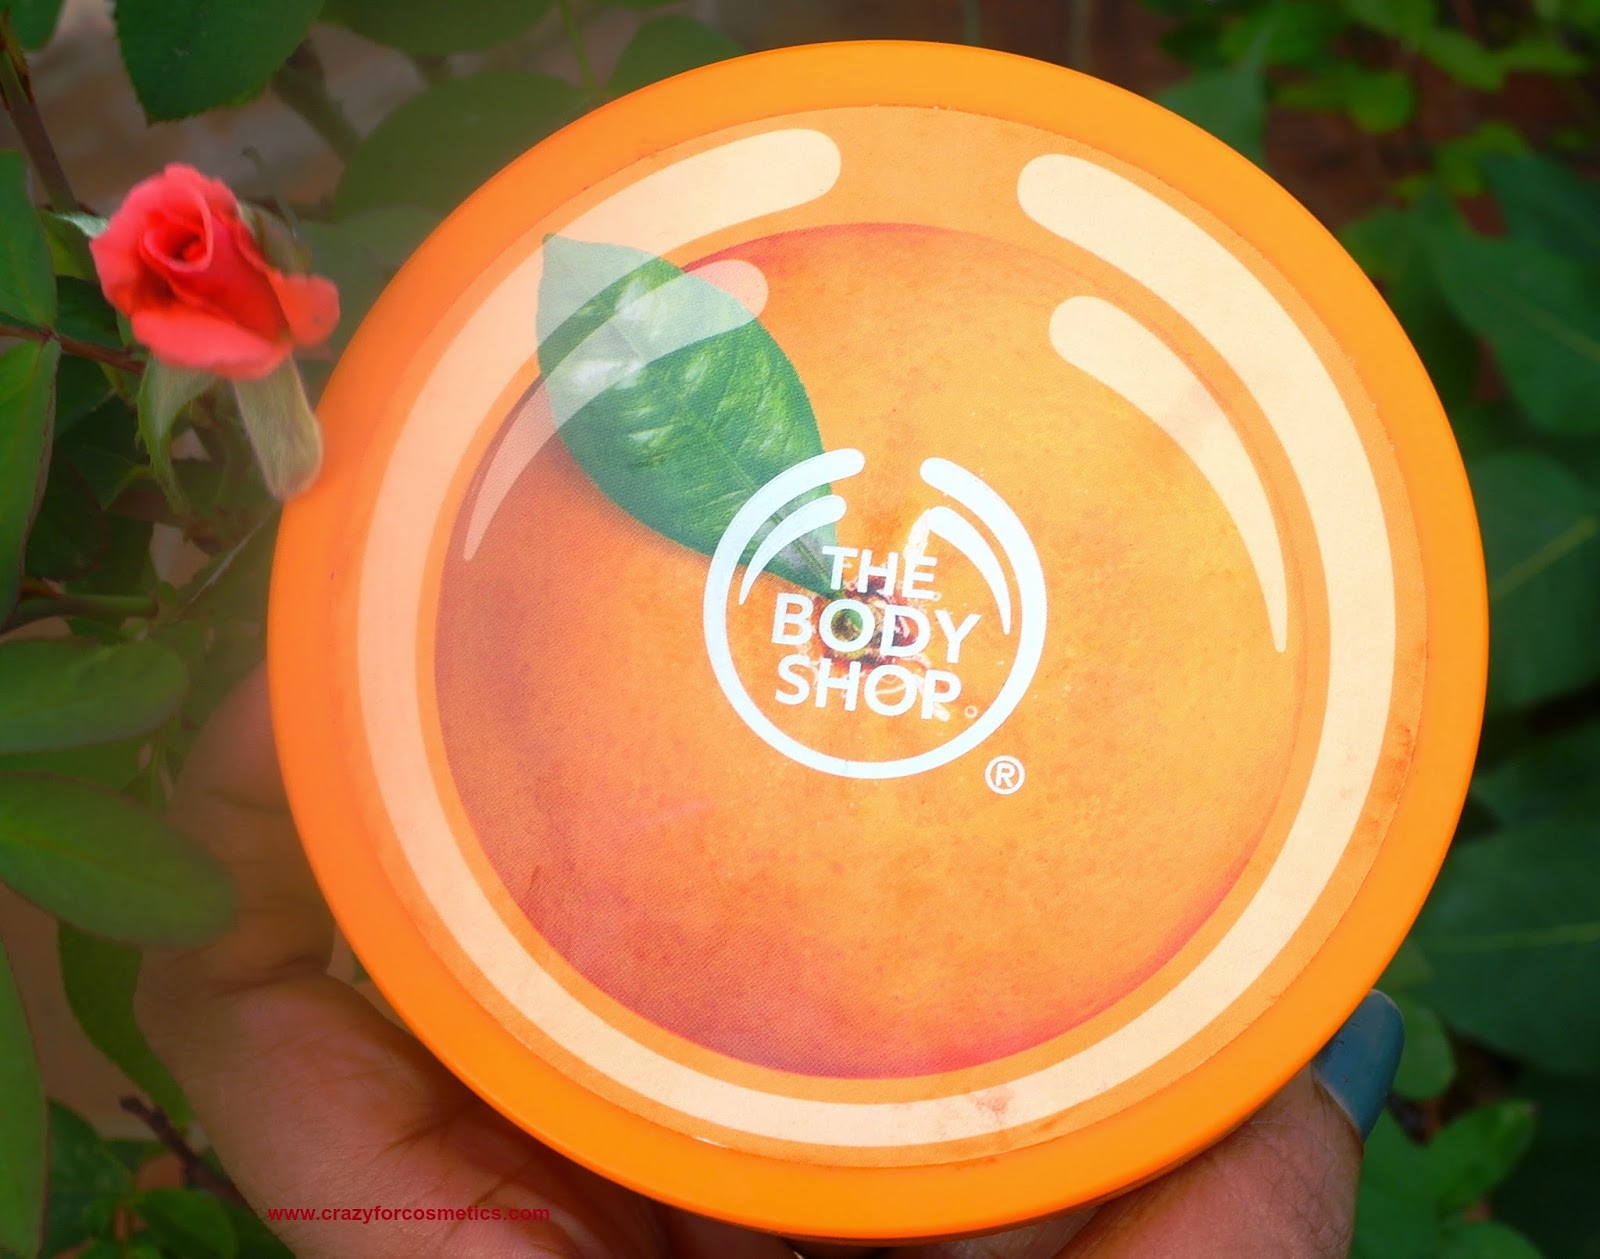 The Body Shop Satsuma Body butter in India